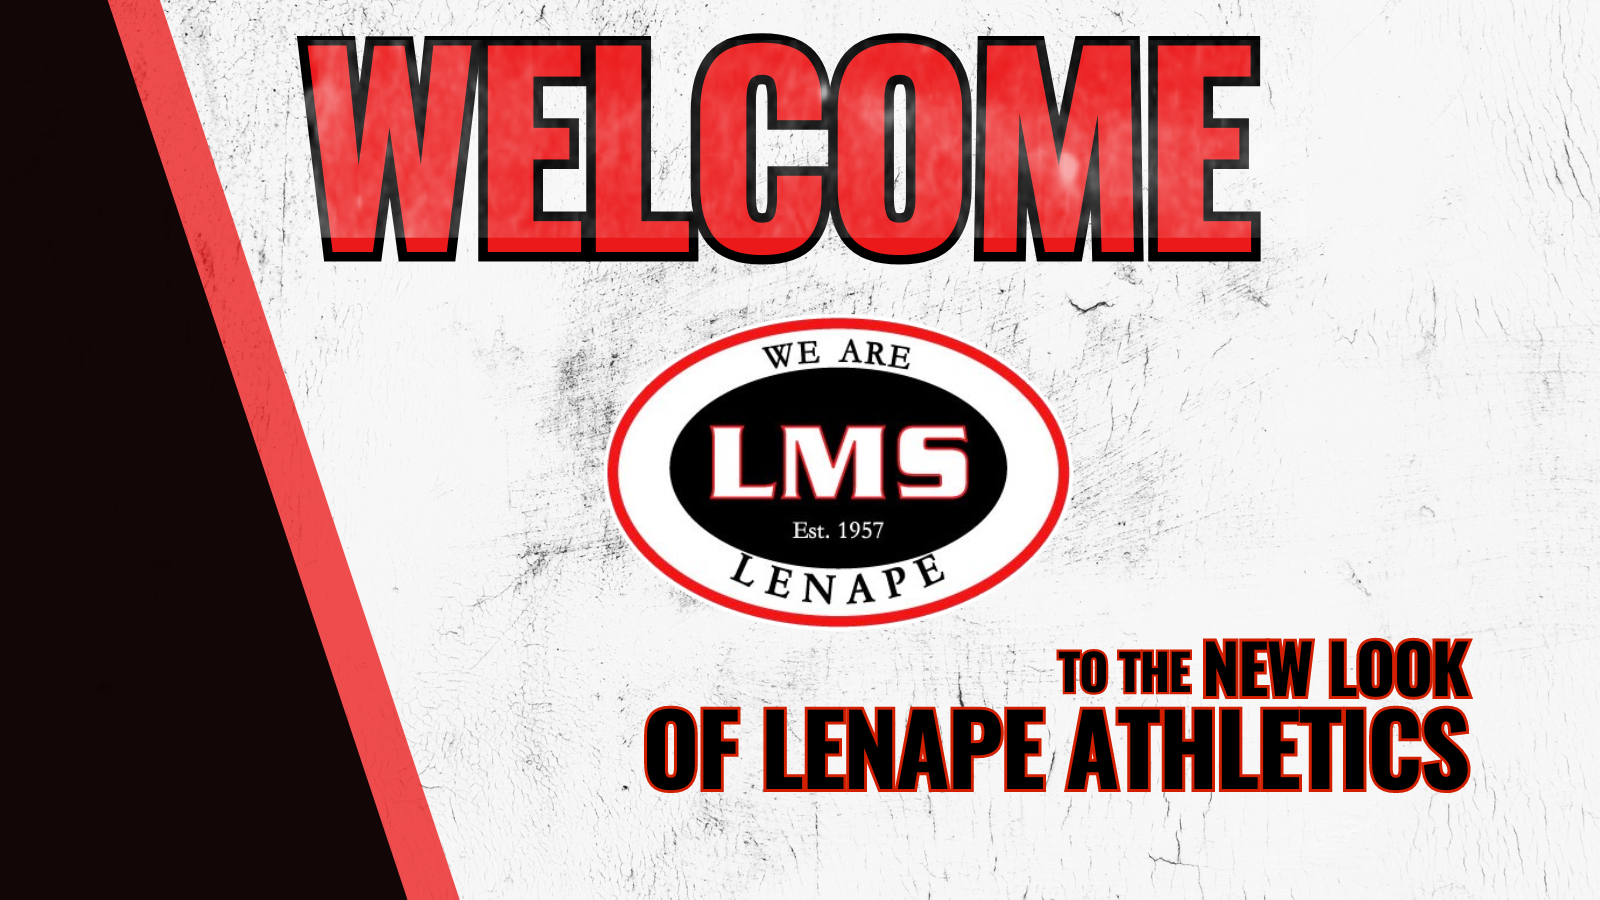 1710361593_CopyofOleyValleyWelcometo1280x320pxTwitterPost14.png - Image for 🎉 Exciting News for Lenape Athletics Fans! 🎉